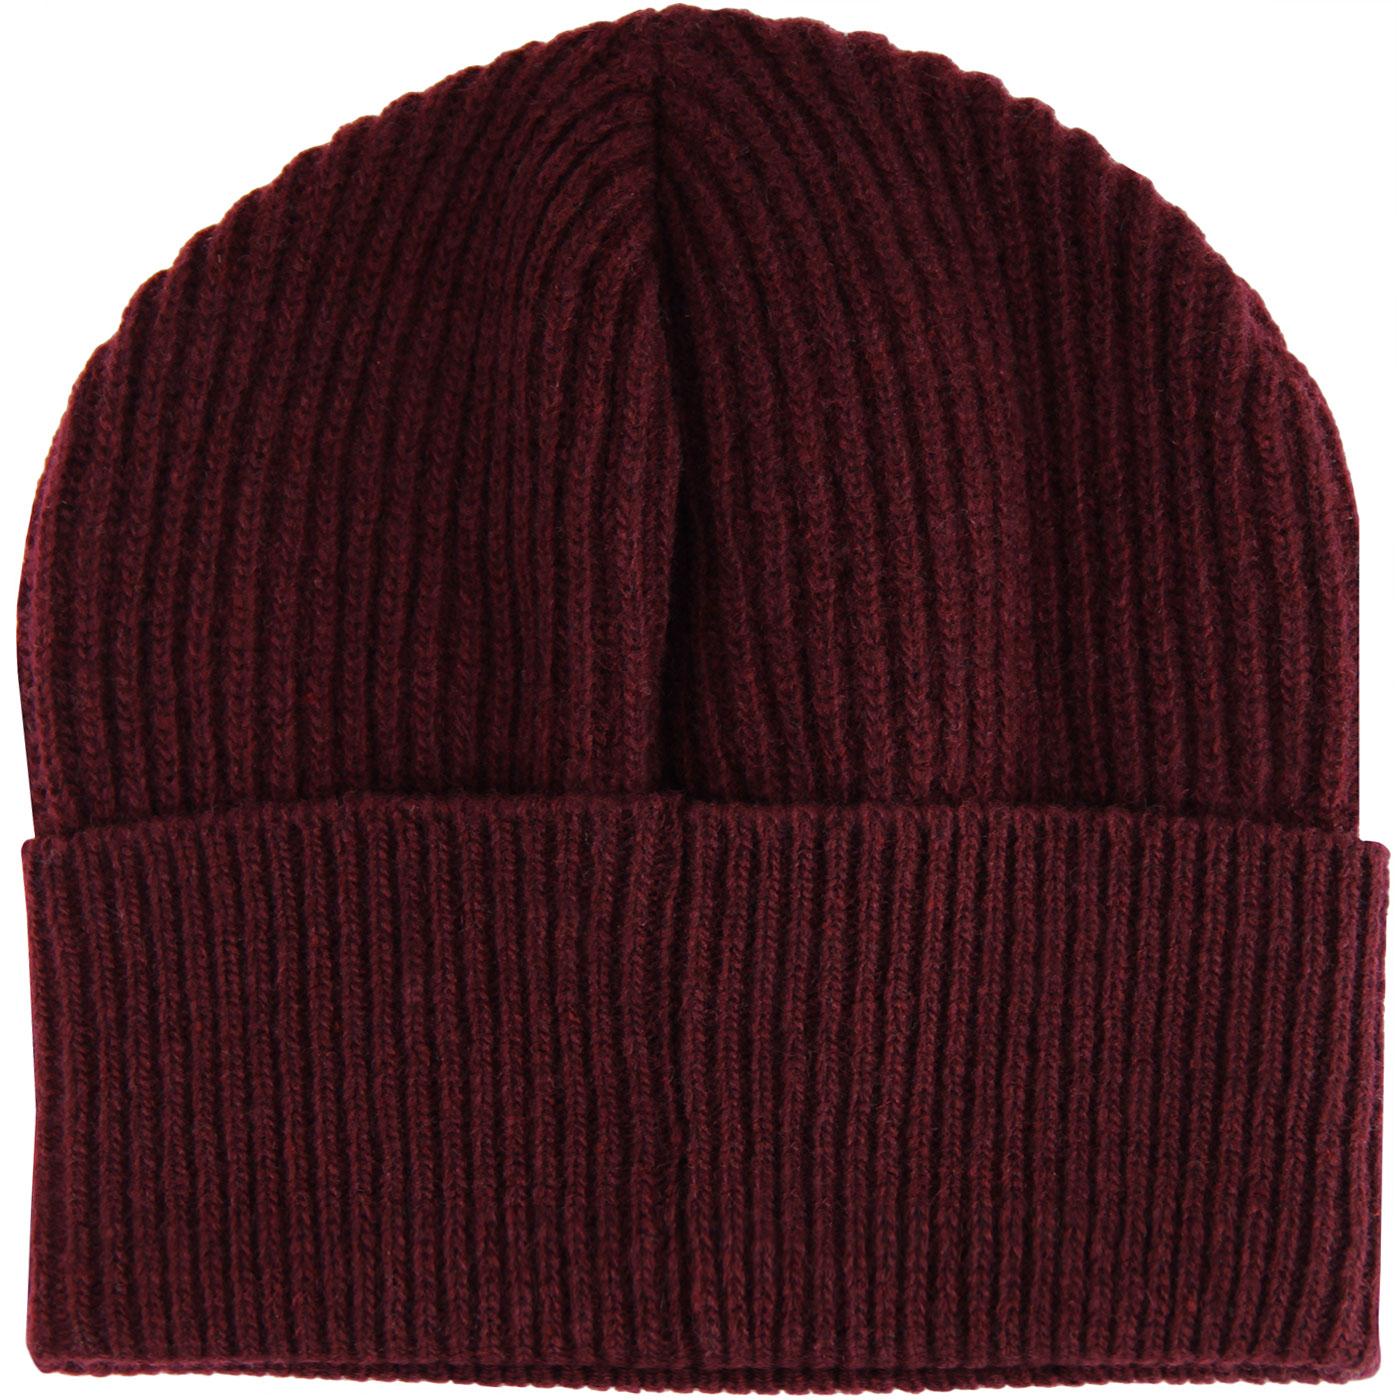 GLOVERALL Retro Knitted Lambswool Fisherman Hat